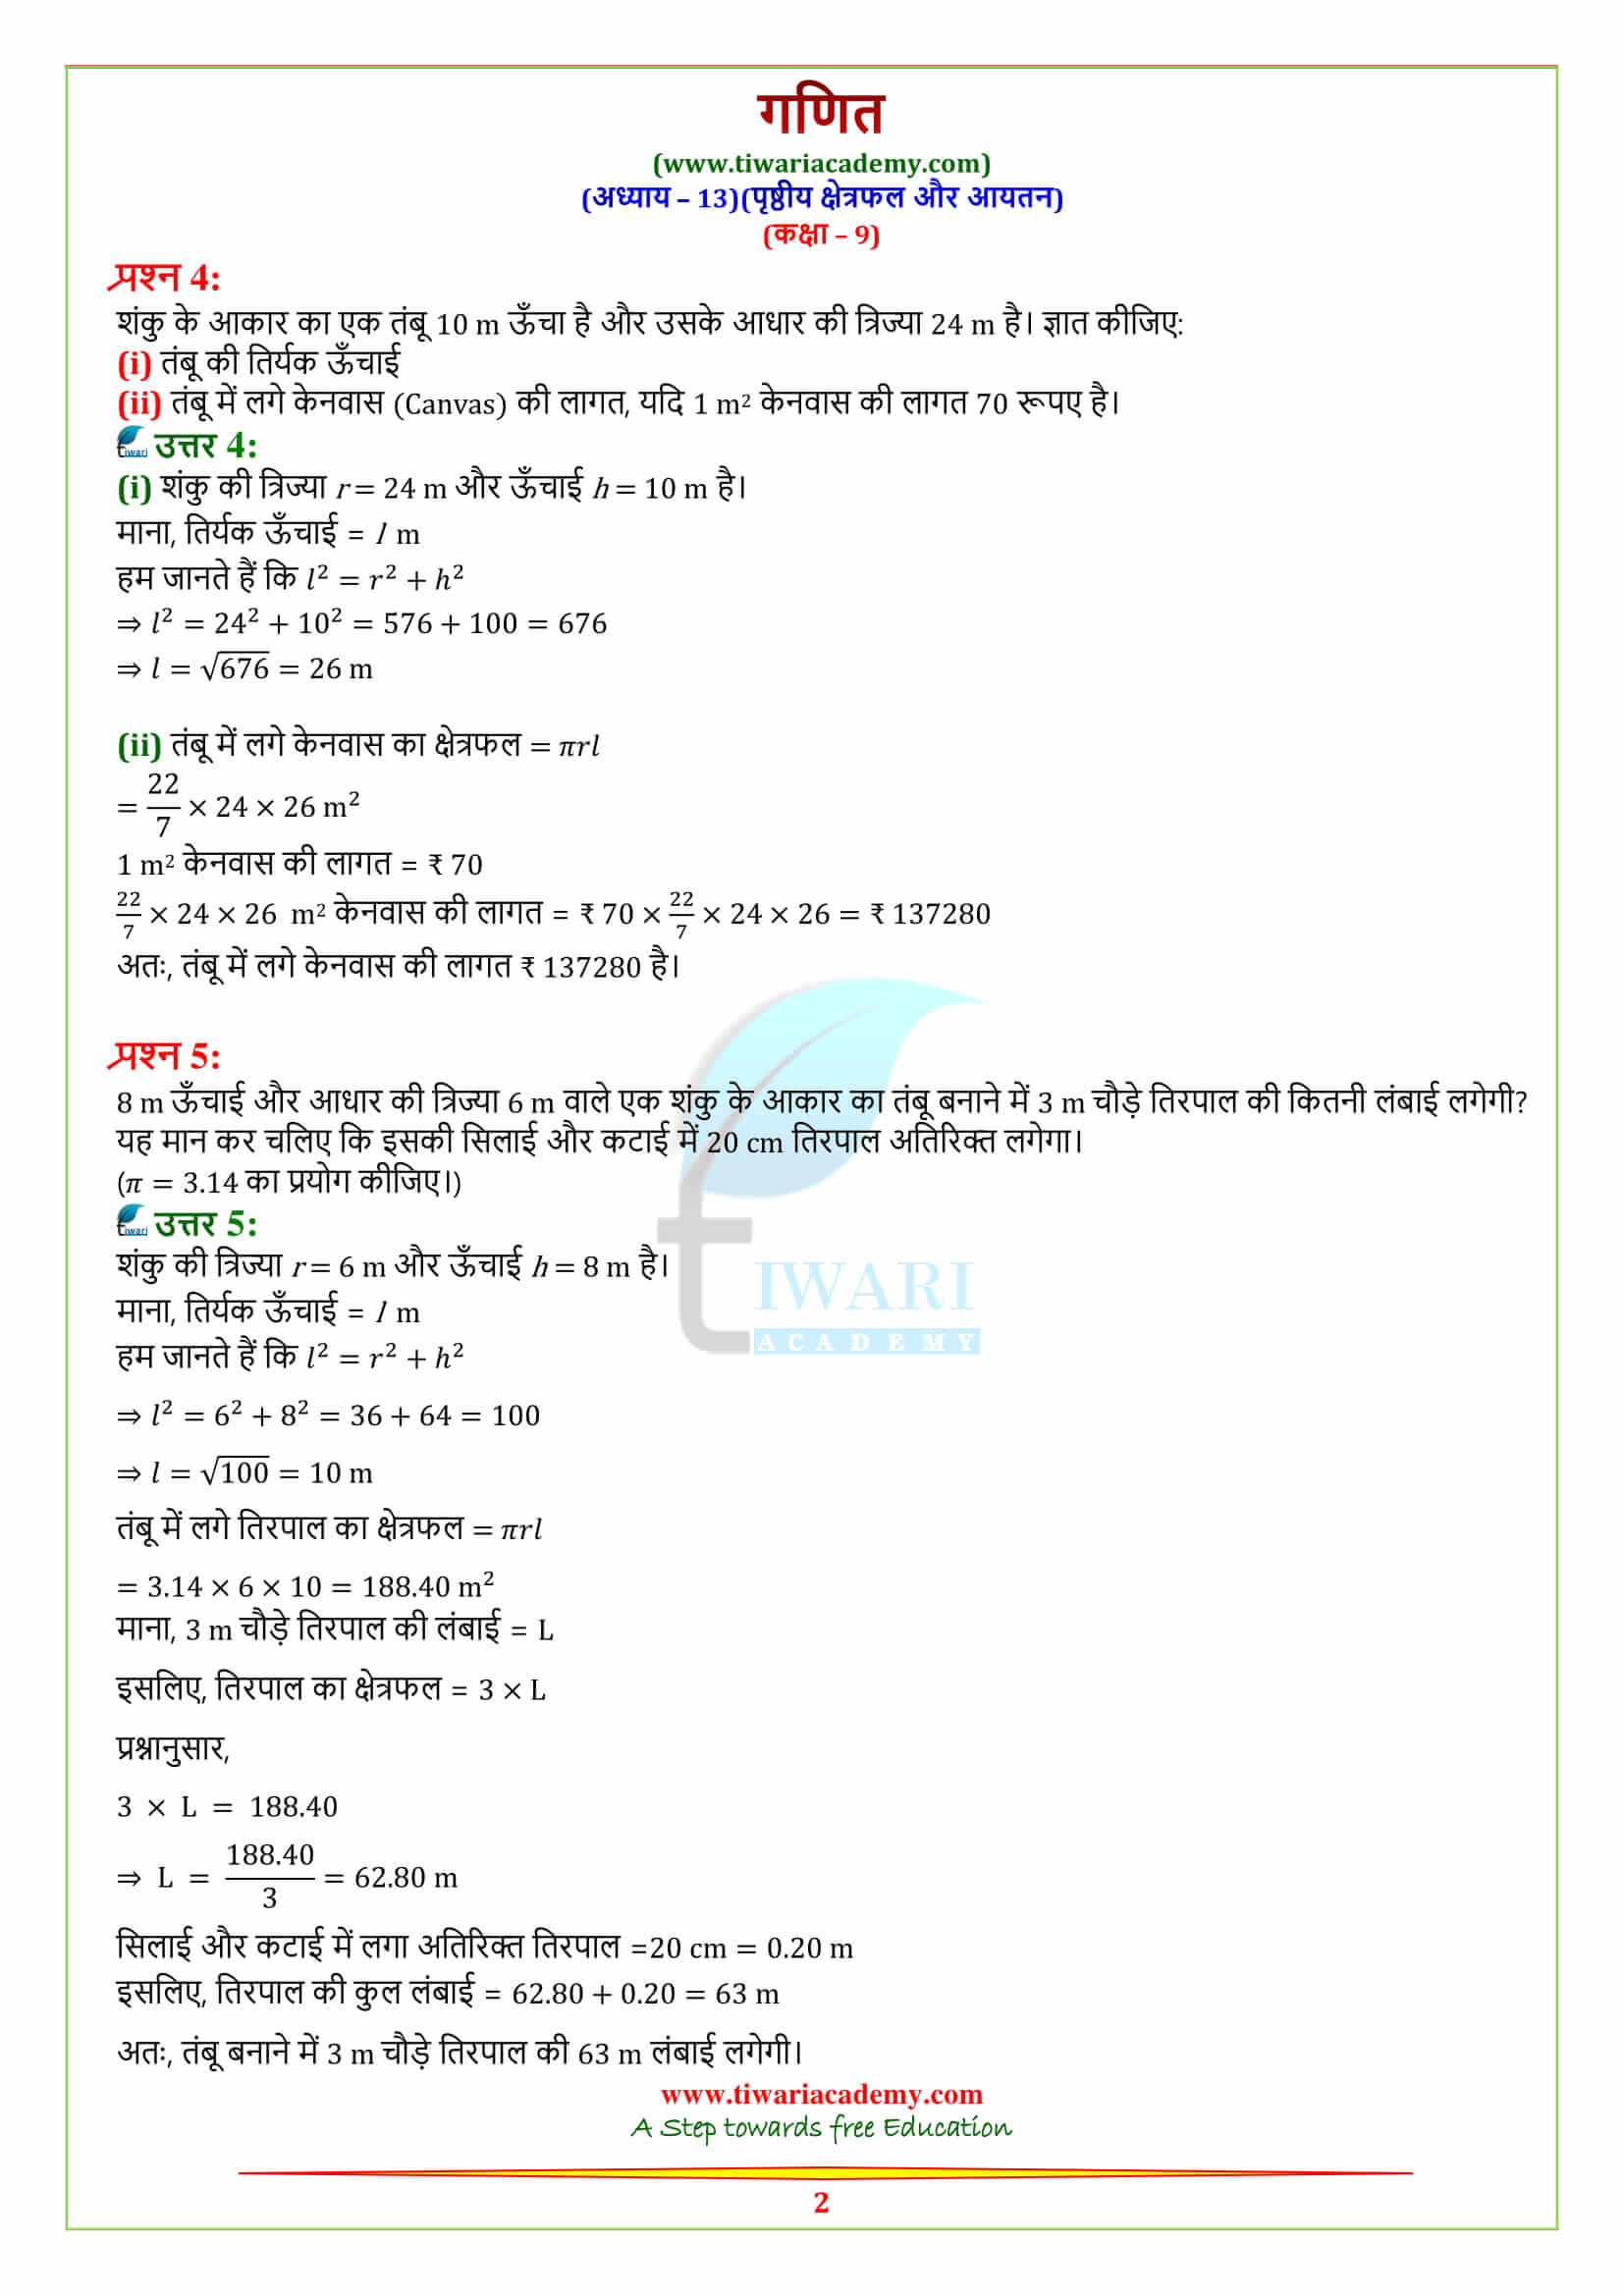 Class 9 Maths Chapter 13 Exercise 13.3 solutions in hindi medium free